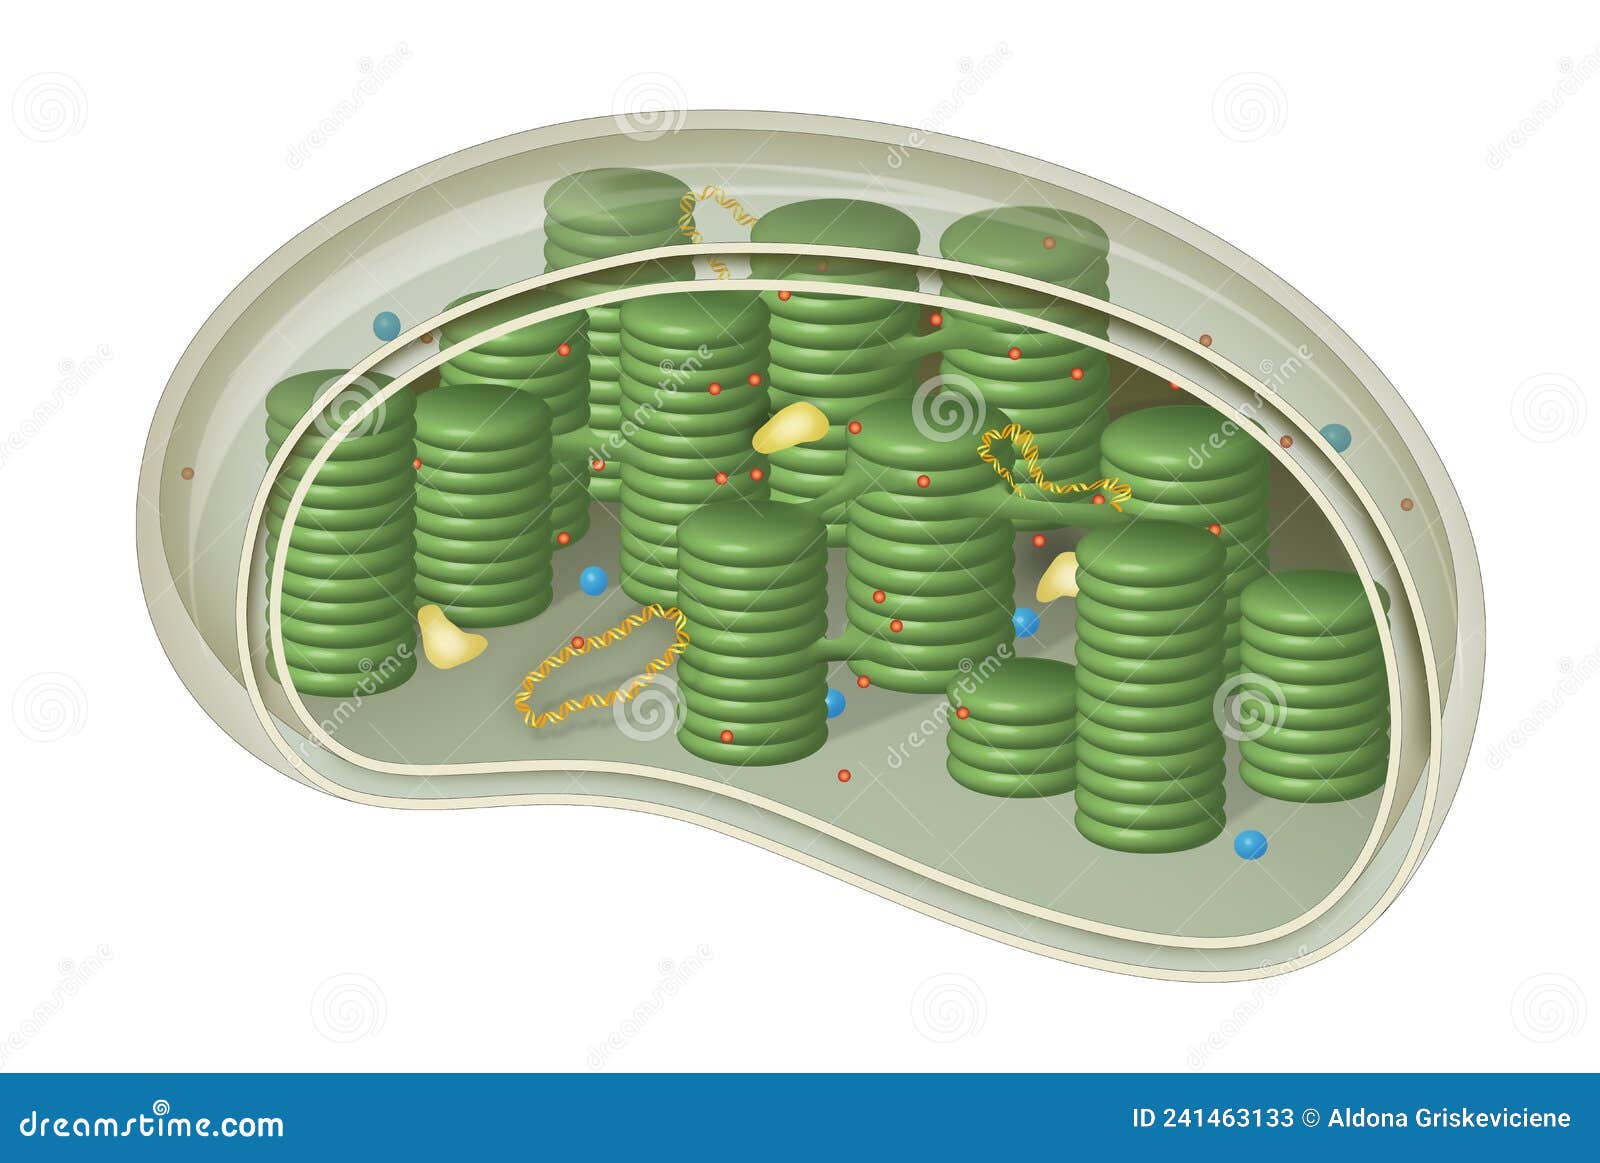 chloroplast, structure within the cells of plants and green algae